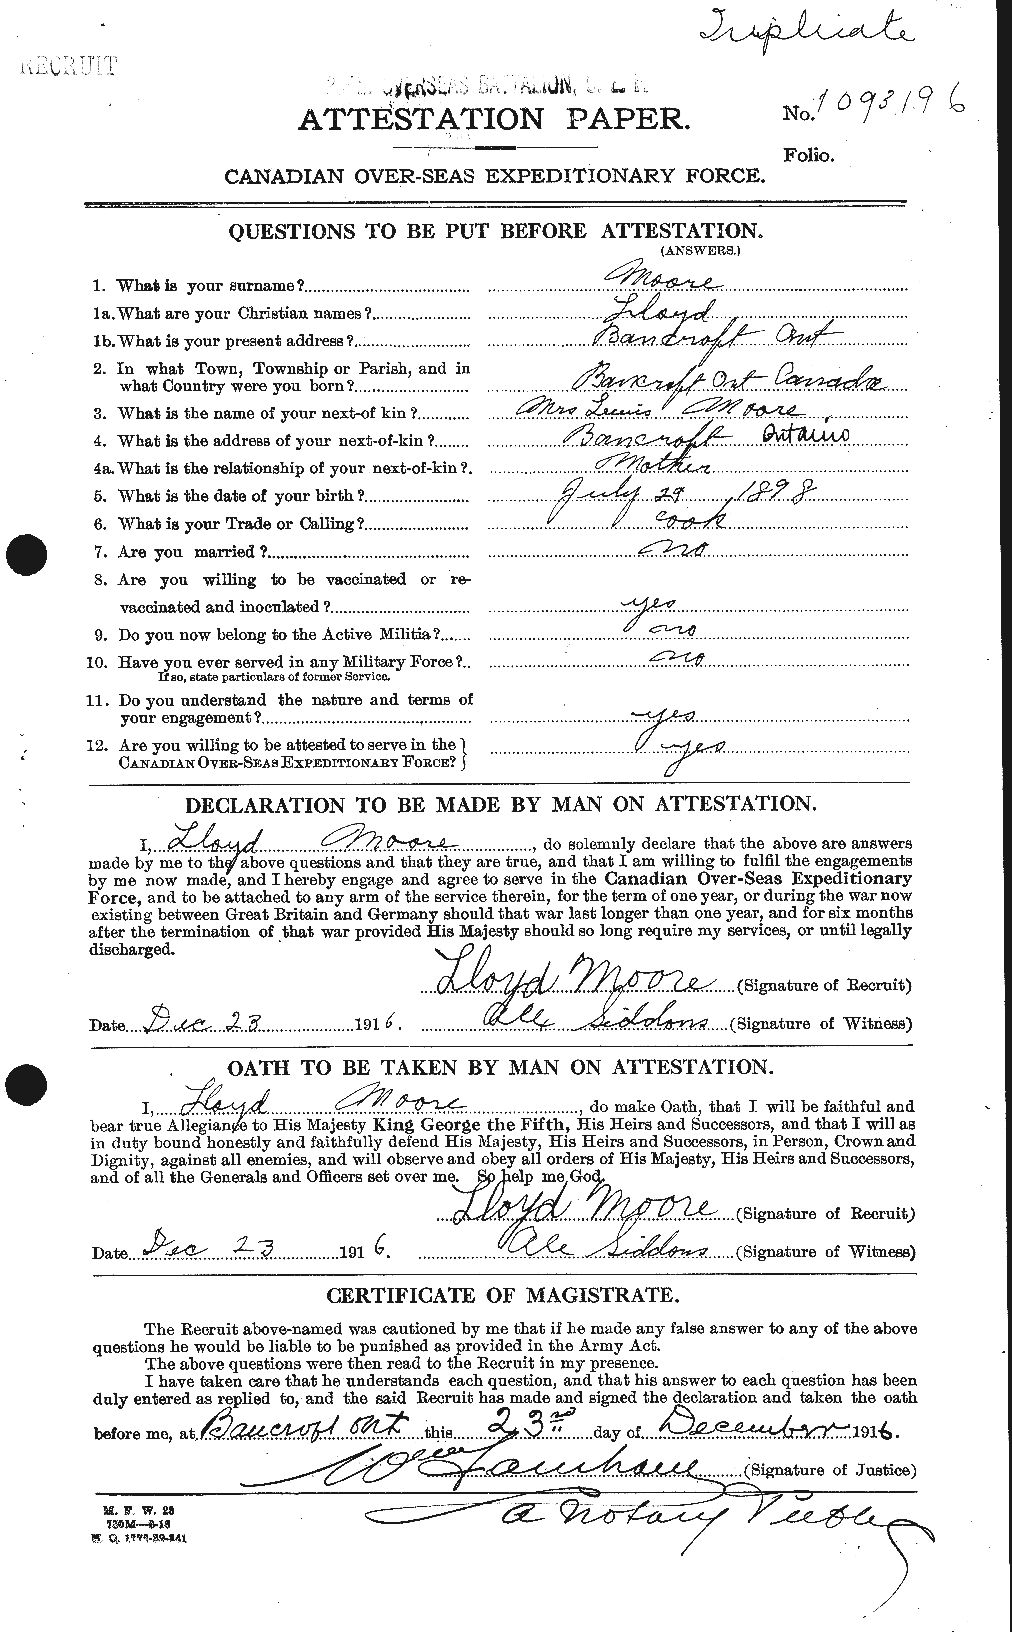 Personnel Records of the First World War - CEF 503417a